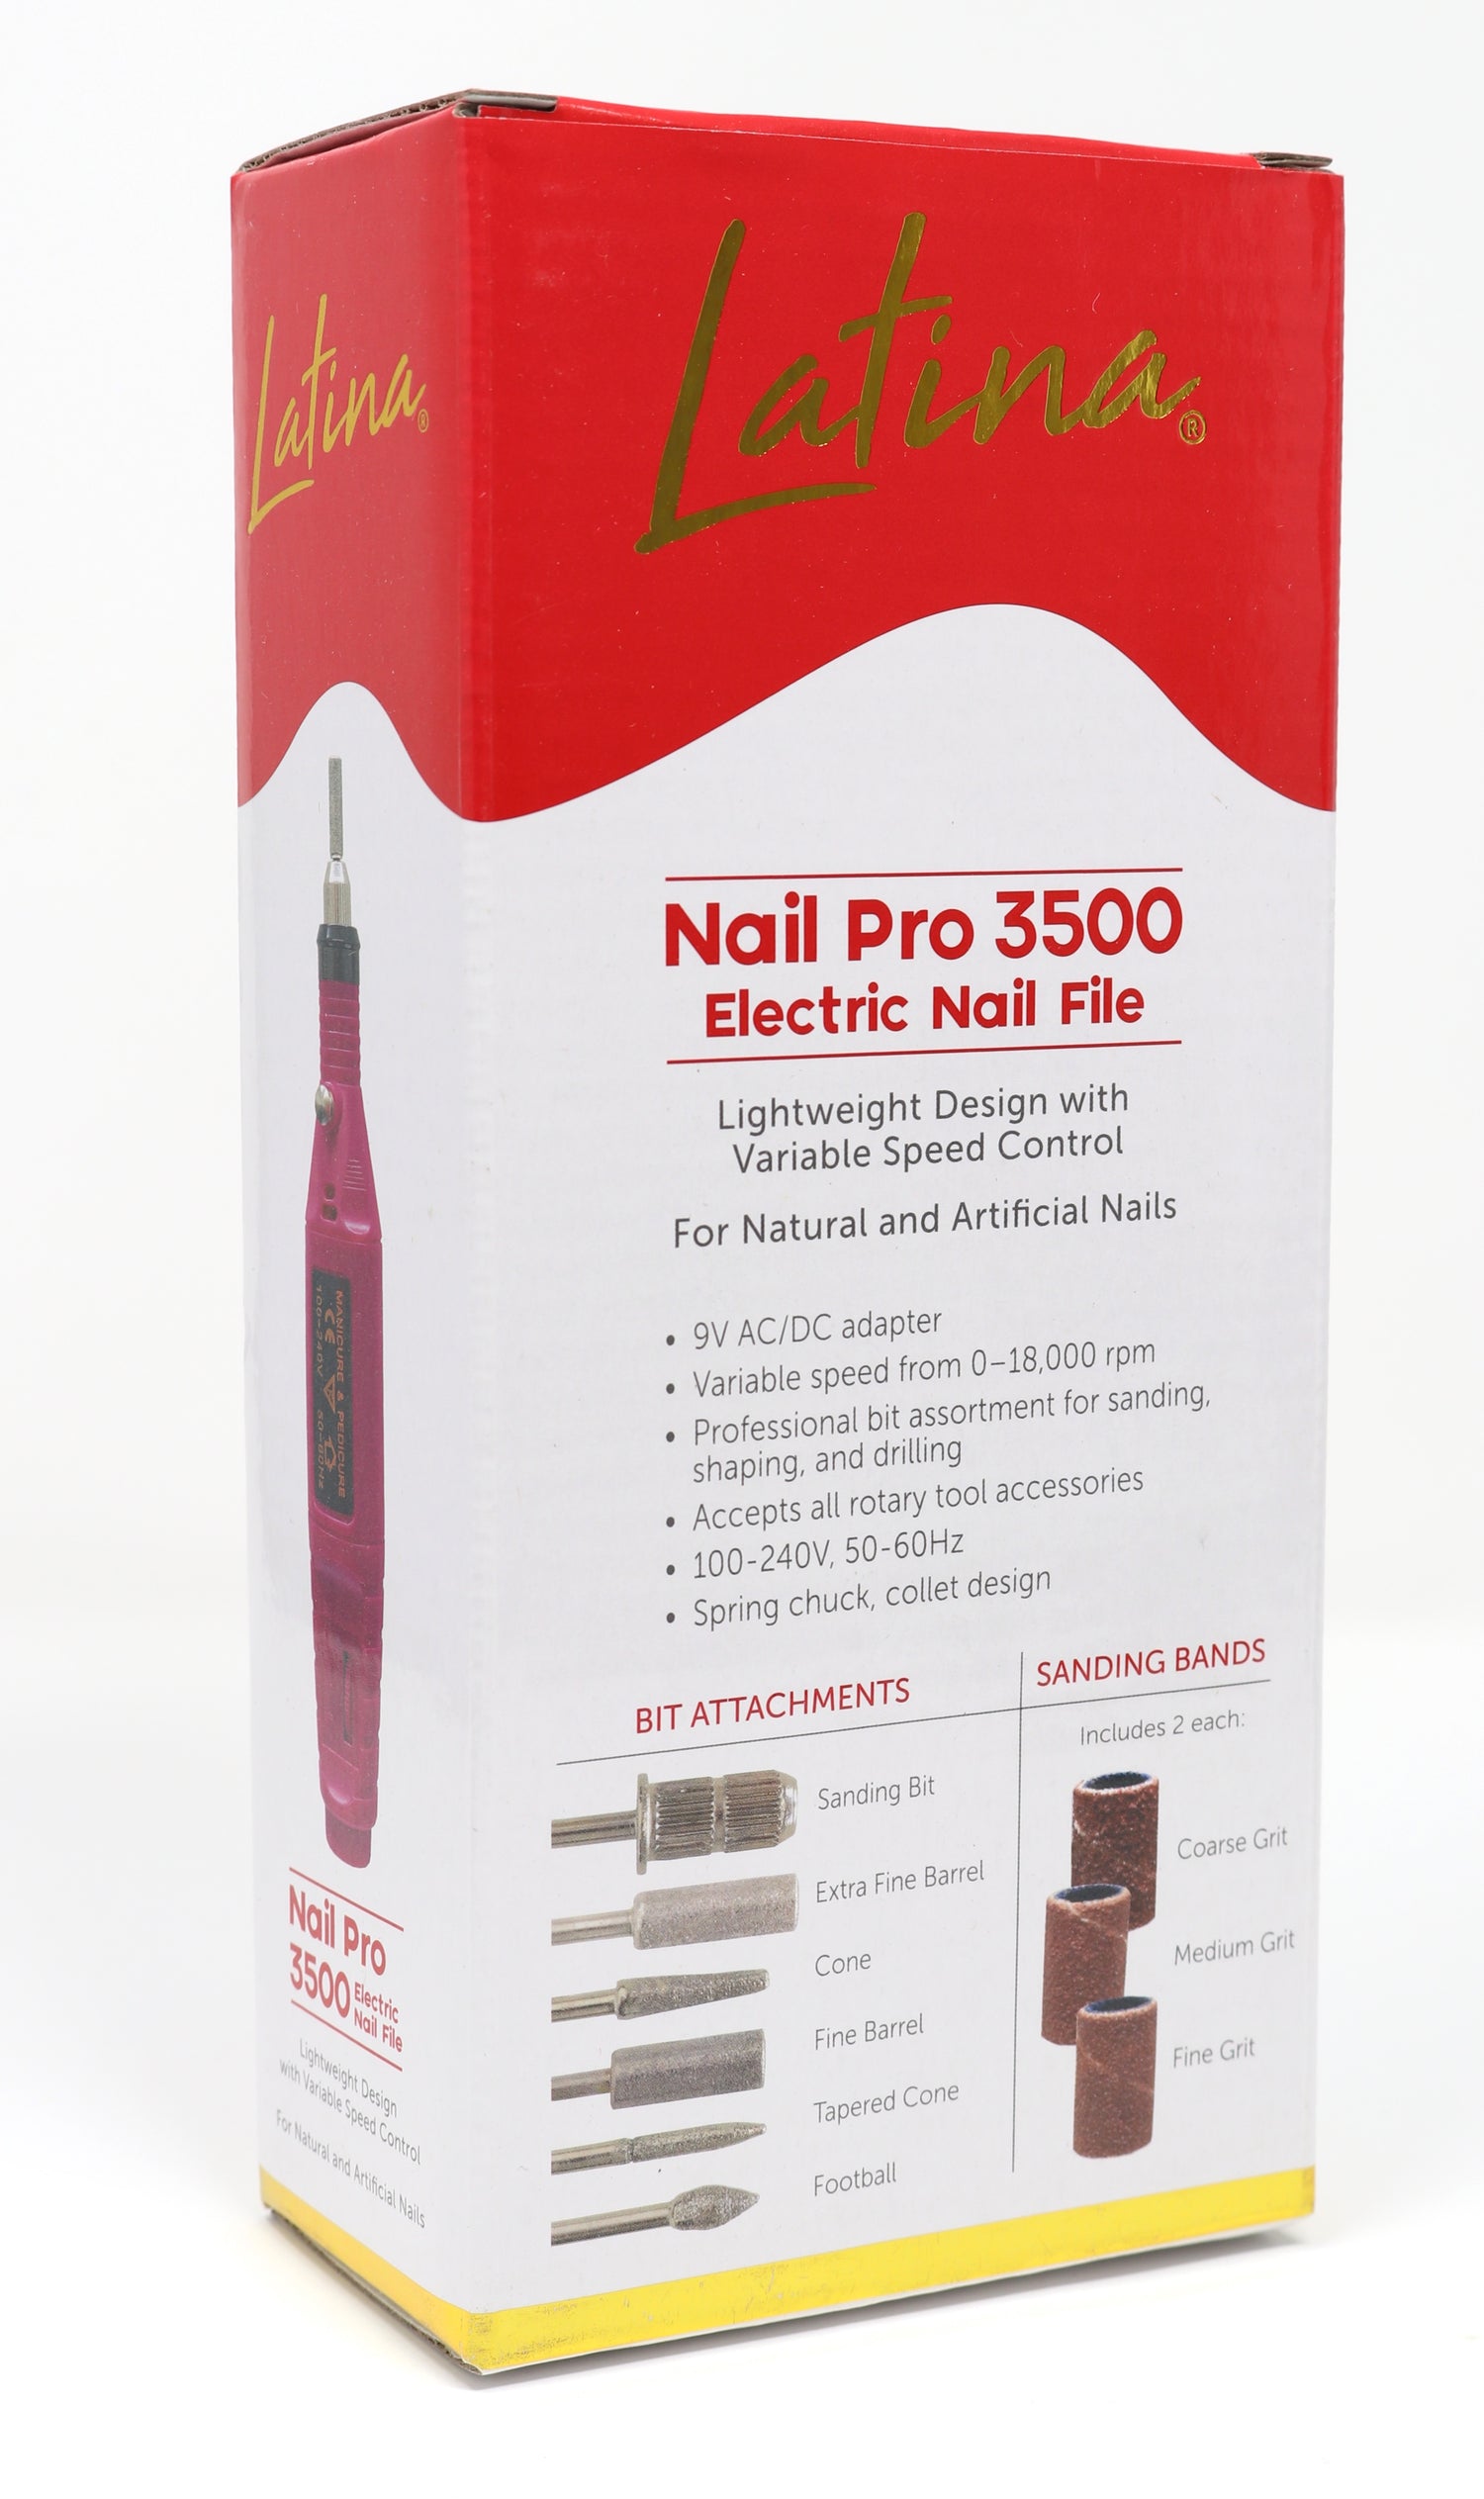 Electric Nail File Category | The Hair And Beauty Company